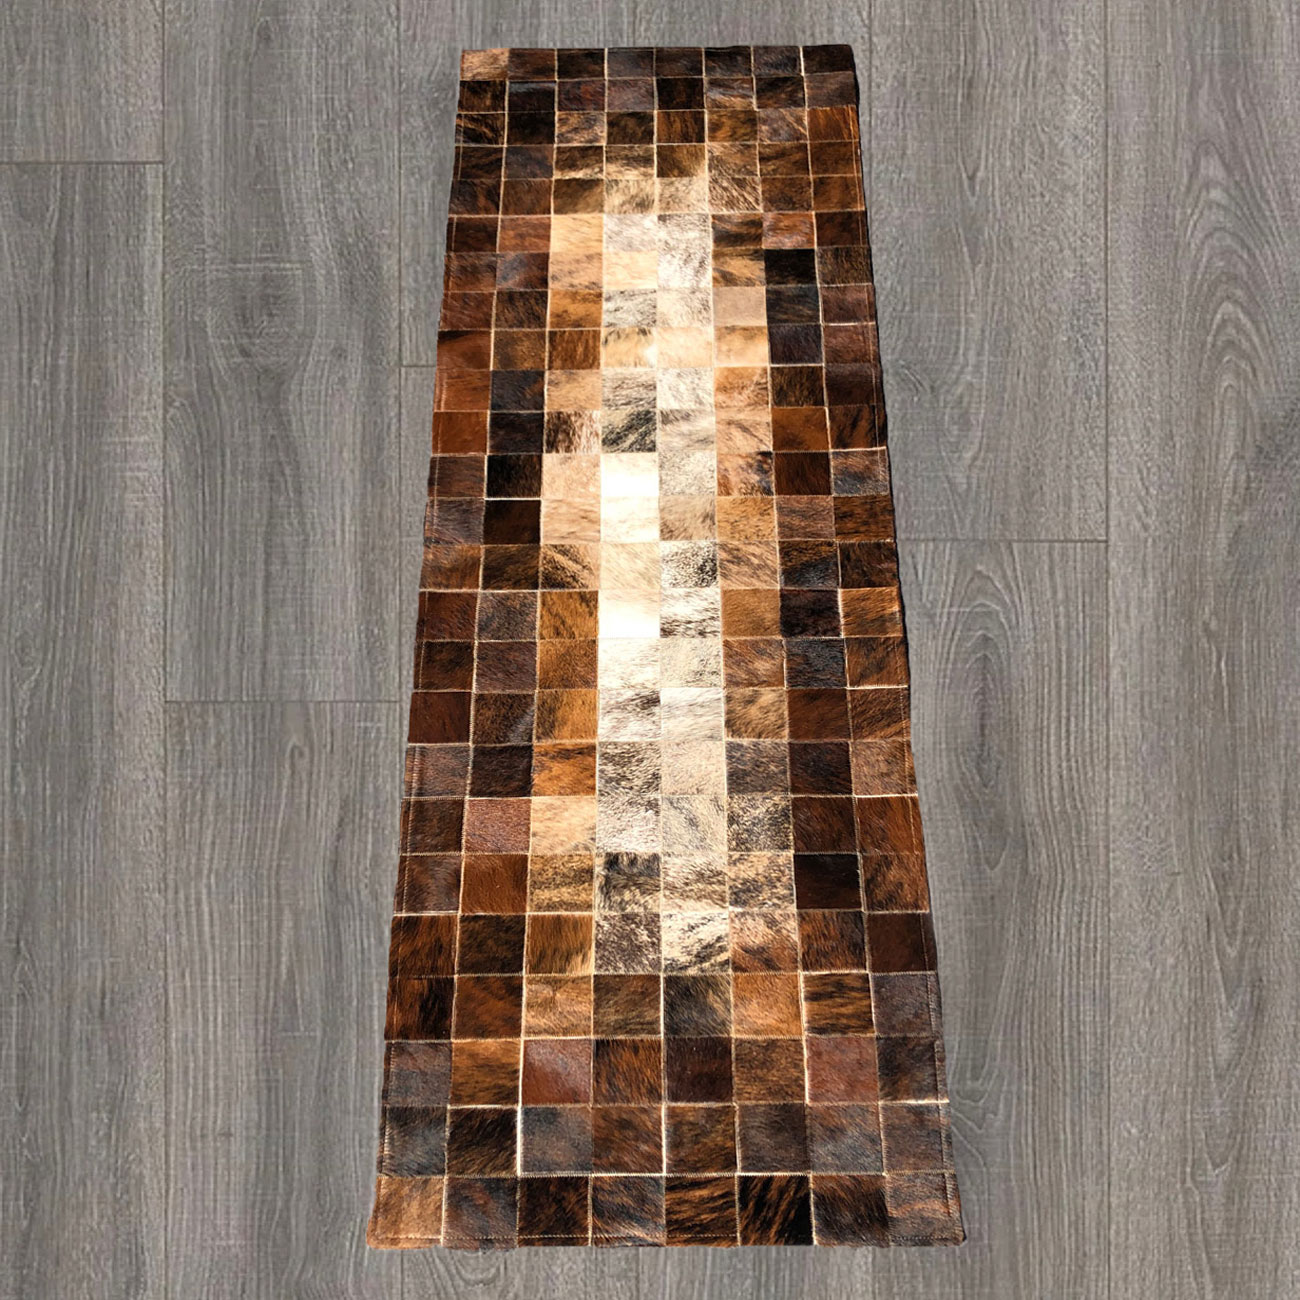 New Cowhide Patchwork Runner Rug Leather 1.3 x 5 ft Animal Skin.Art R68D 